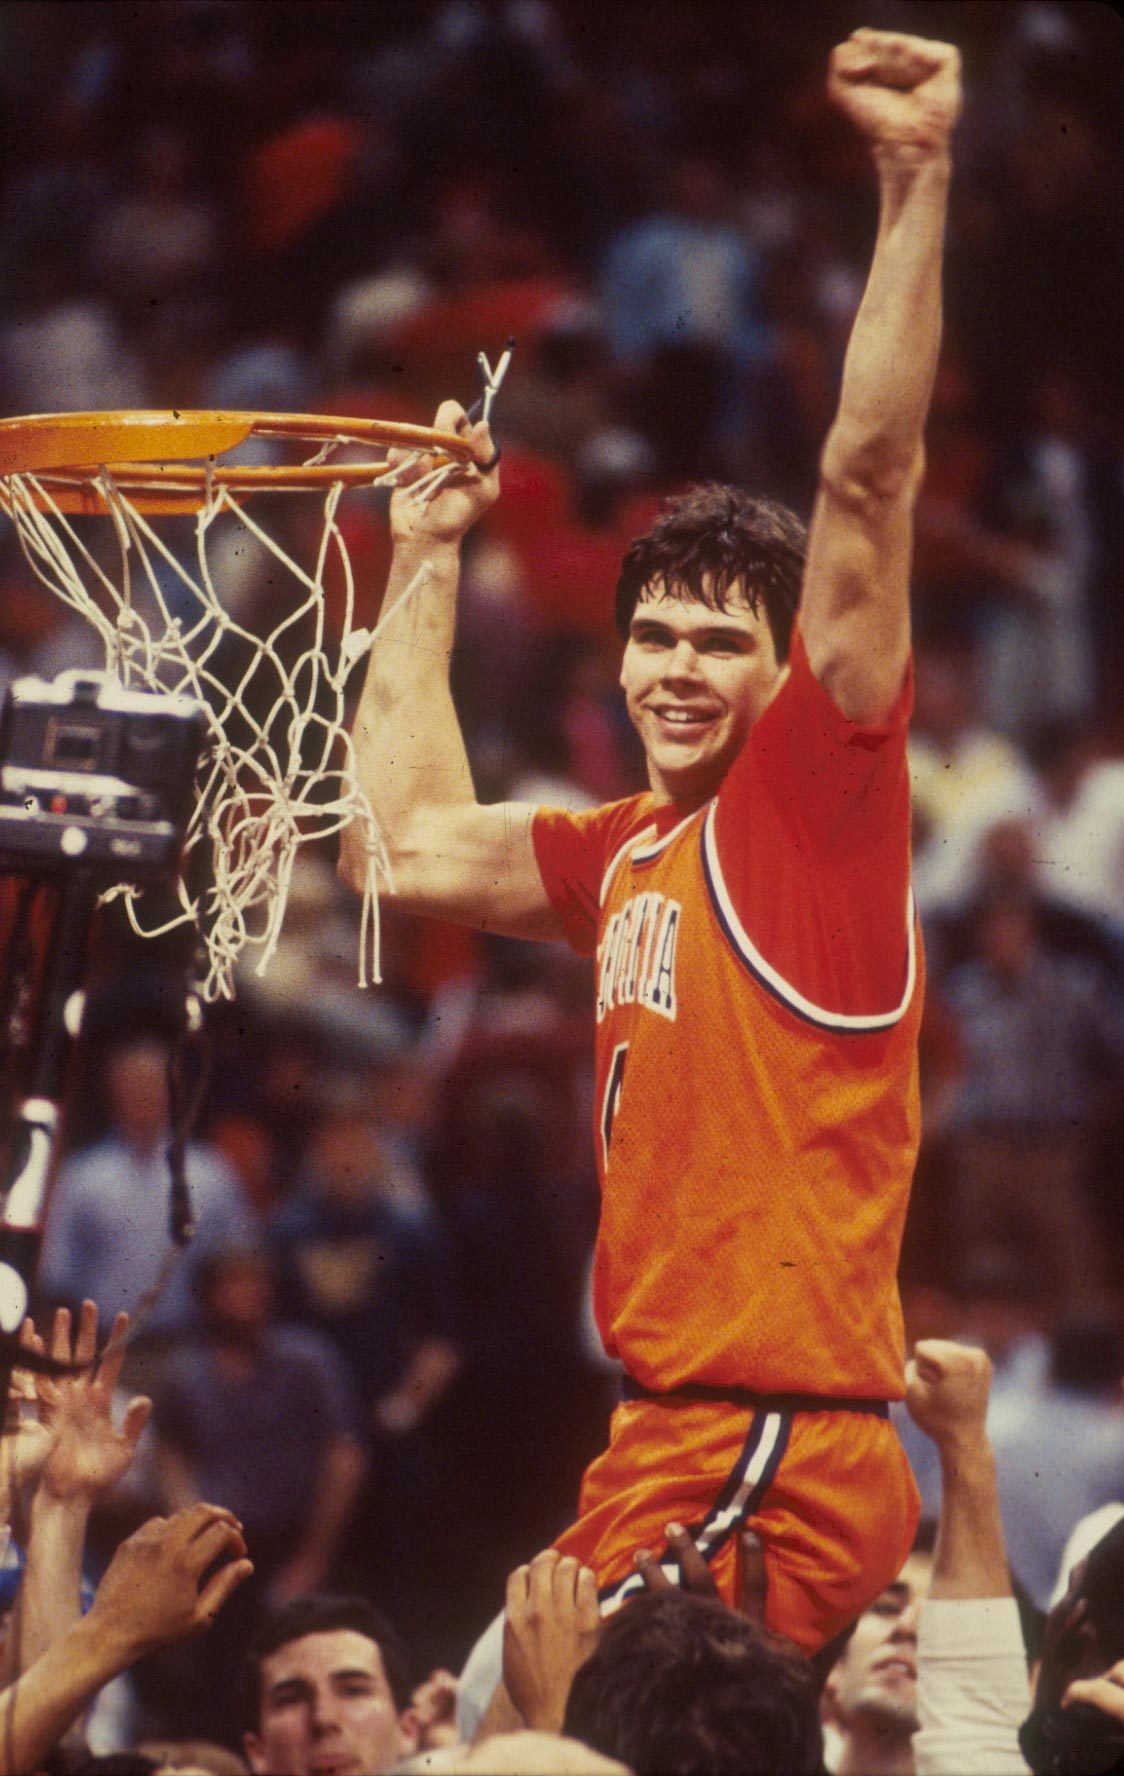 Old image of Jimmy Miller cutting down net after a win 